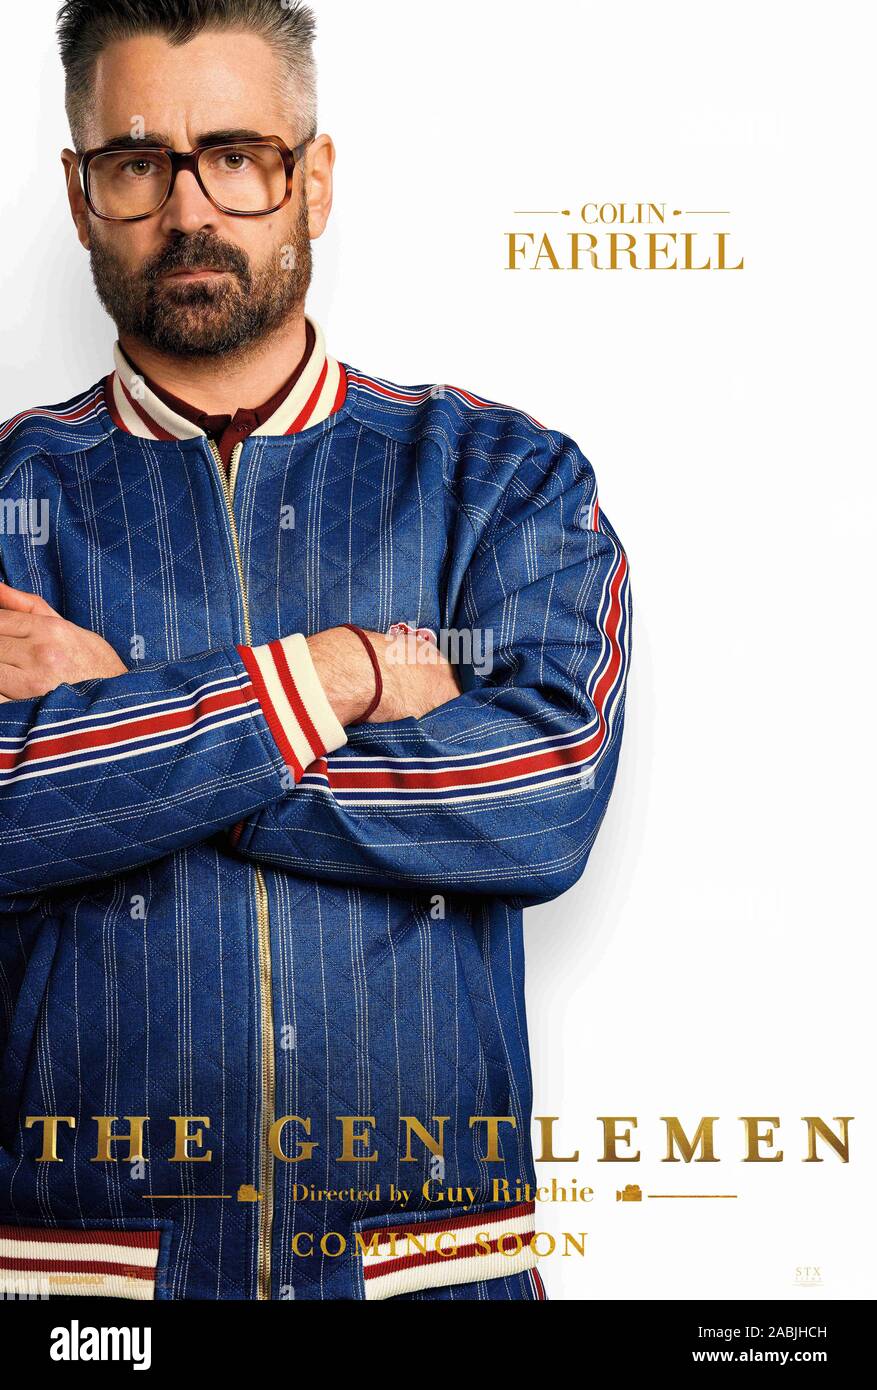 RELEASE DATE: January 24, 2020 TITLE: The Gentlemen STUDIO: Miramax DIRECTOR: Guy Ritchie PLOT: A British drug lord tries to sell off his highly profitable empire to a dynasty of Oklahoma billionaires. STARRING: COLIN FARRELL poster art. (Credit Image: © Miramax/Entertainment Pictures) Stock Photo